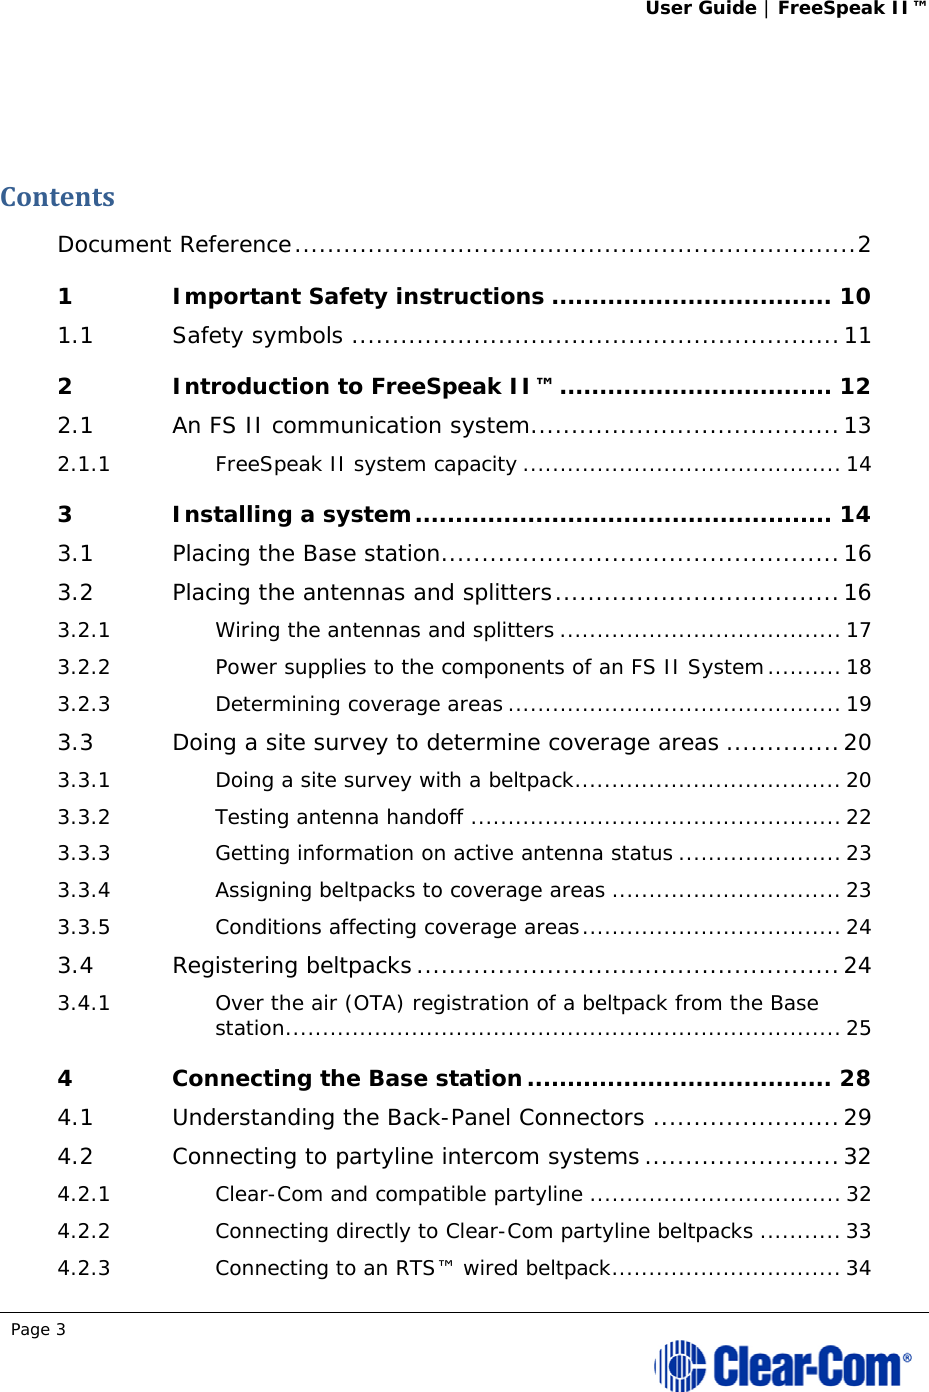 User Guide | FreeSpeak II™  Page 3   ContentsDocument Reference ..................................................................... 21Important Safety instructions ................................... 101.1Safety symbols ............................................................ 112Introduction to FreeSpeak II™ .................................. 122.1An FS II communication system ...................................... 132.1.1FreeSpeak II system capacity ........................................... 143Installing a system .................................................... 143.1Placing the Base station ................................................. 163.2Placing the antennas and splitters ................................... 163.2.1Wiring the antennas and splitters ...................................... 173.2.2Power supplies to the components of an FS II System .......... 183.2.3Determining coverage areas ............................................. 193.3Doing a site survey to determine coverage areas .............. 203.3.1Doing a site survey with a beltpack .................................... 203.3.2Testing antenna handoff .................................................. 223.3.3Getting information on active antenna status ...................... 233.3.4Assigning beltpacks to coverage areas ............................... 233.3.5Conditions affecting coverage areas ................................... 243.4Registering beltpacks .................................................... 243.4.1Over the air (OTA) registration of a beltpack from the Base station ........................................................................... 254Connecting the Base station ...................................... 284.1Understanding the Back-Panel Connectors ....................... 294.2Connecting to partyline intercom systems ........................ 324.2.1Clear-Com and compatible partyline .................................. 324.2.2Connecting directly to Clear-Com partyline beltpacks ........... 334.2.3Connecting to an RTS™ wired beltpack ............................... 34